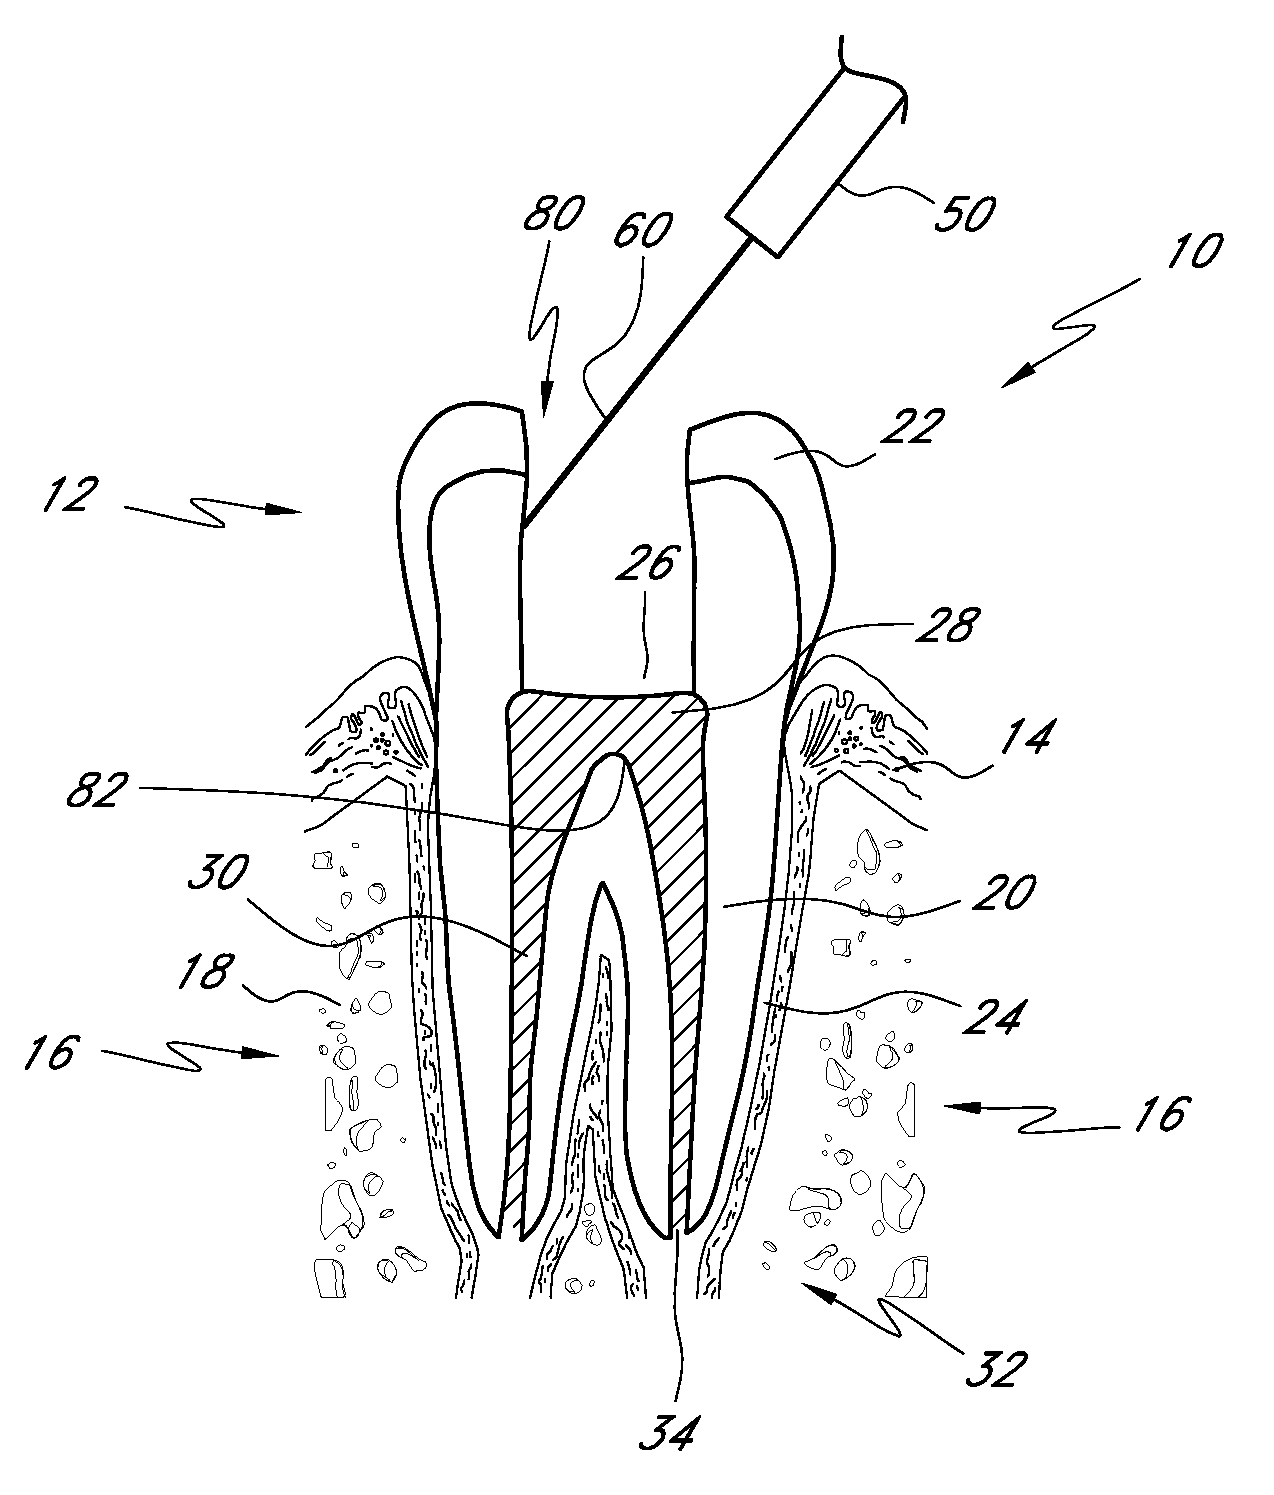 Apparatus and methods for treating root canals of teeth